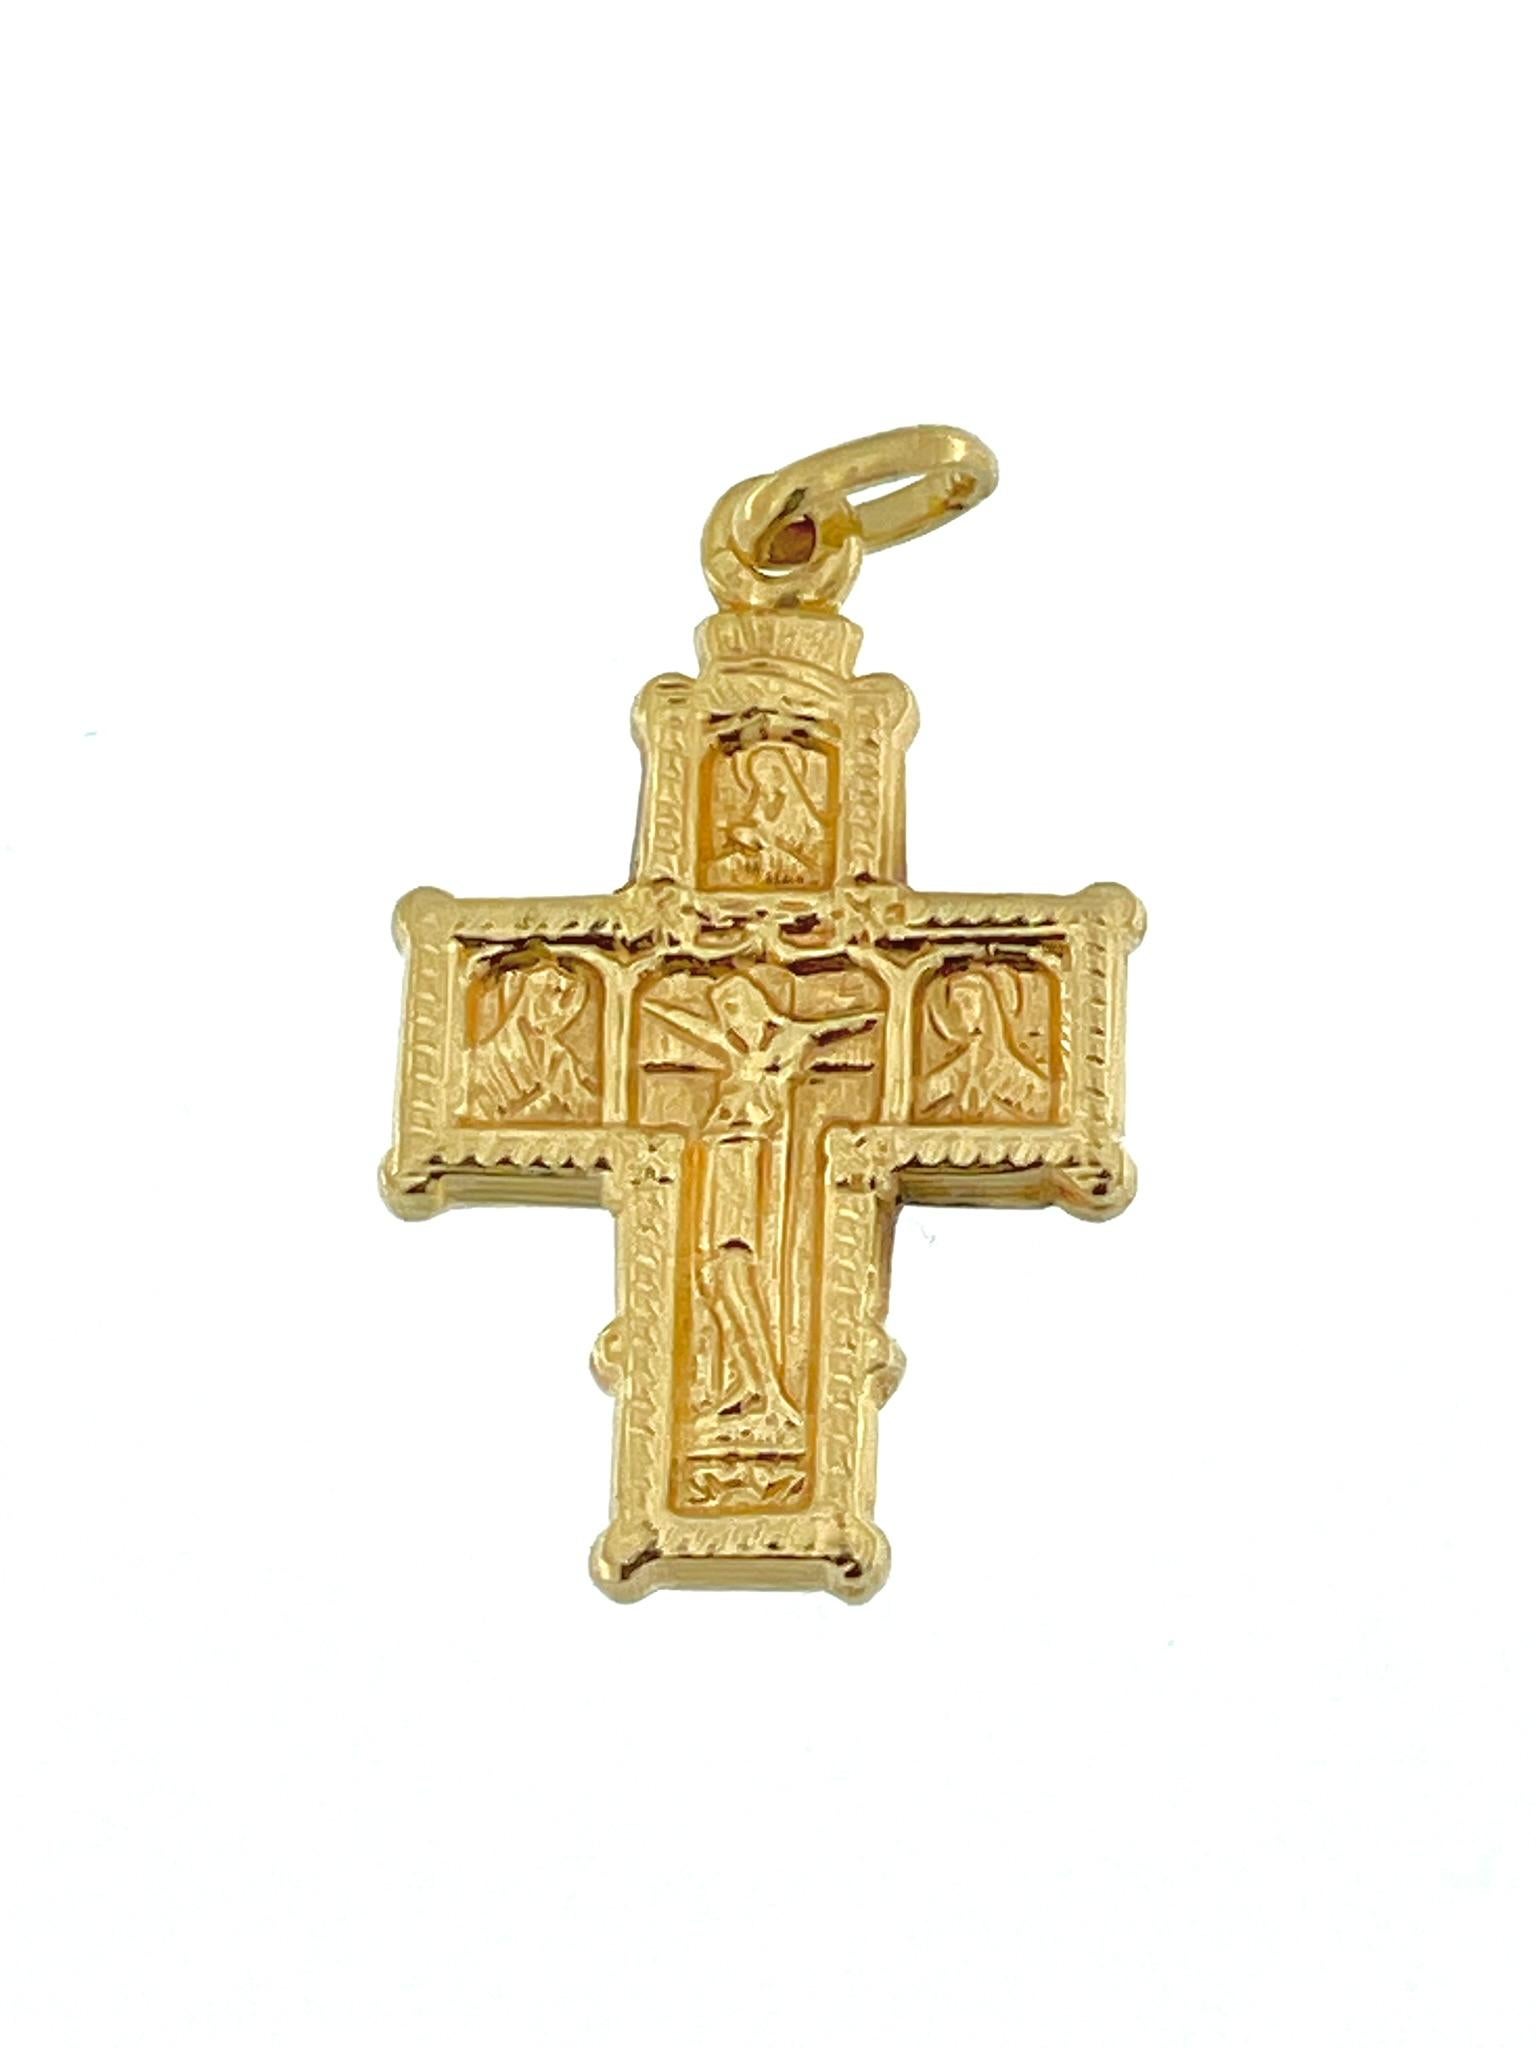 The French Antique Byzantine Style Crucifix is a stunning piece of religious artistry crafted with meticulous attention to detail. It is made from 18kt yellow gold, providing a luxurious and timeless appeal. The crucifix follows the Byzantine style,